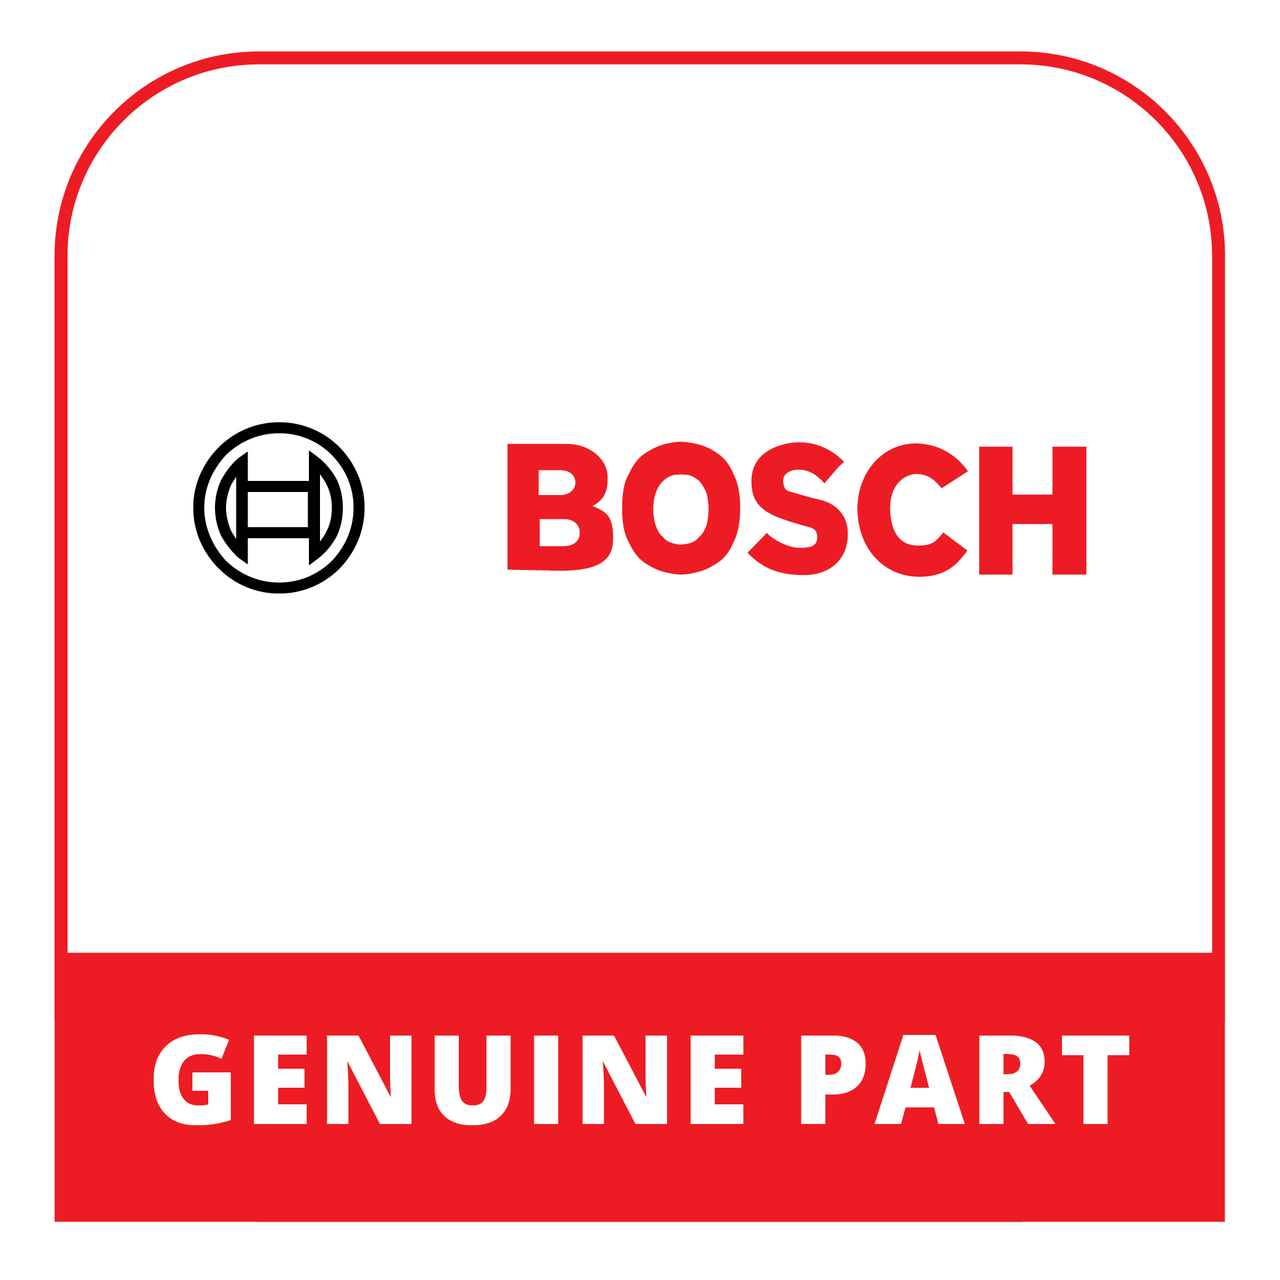 Bosch (Thermador) 12028321 - Control Module Not Programmed - Genuine Bosch (Thermador) Part